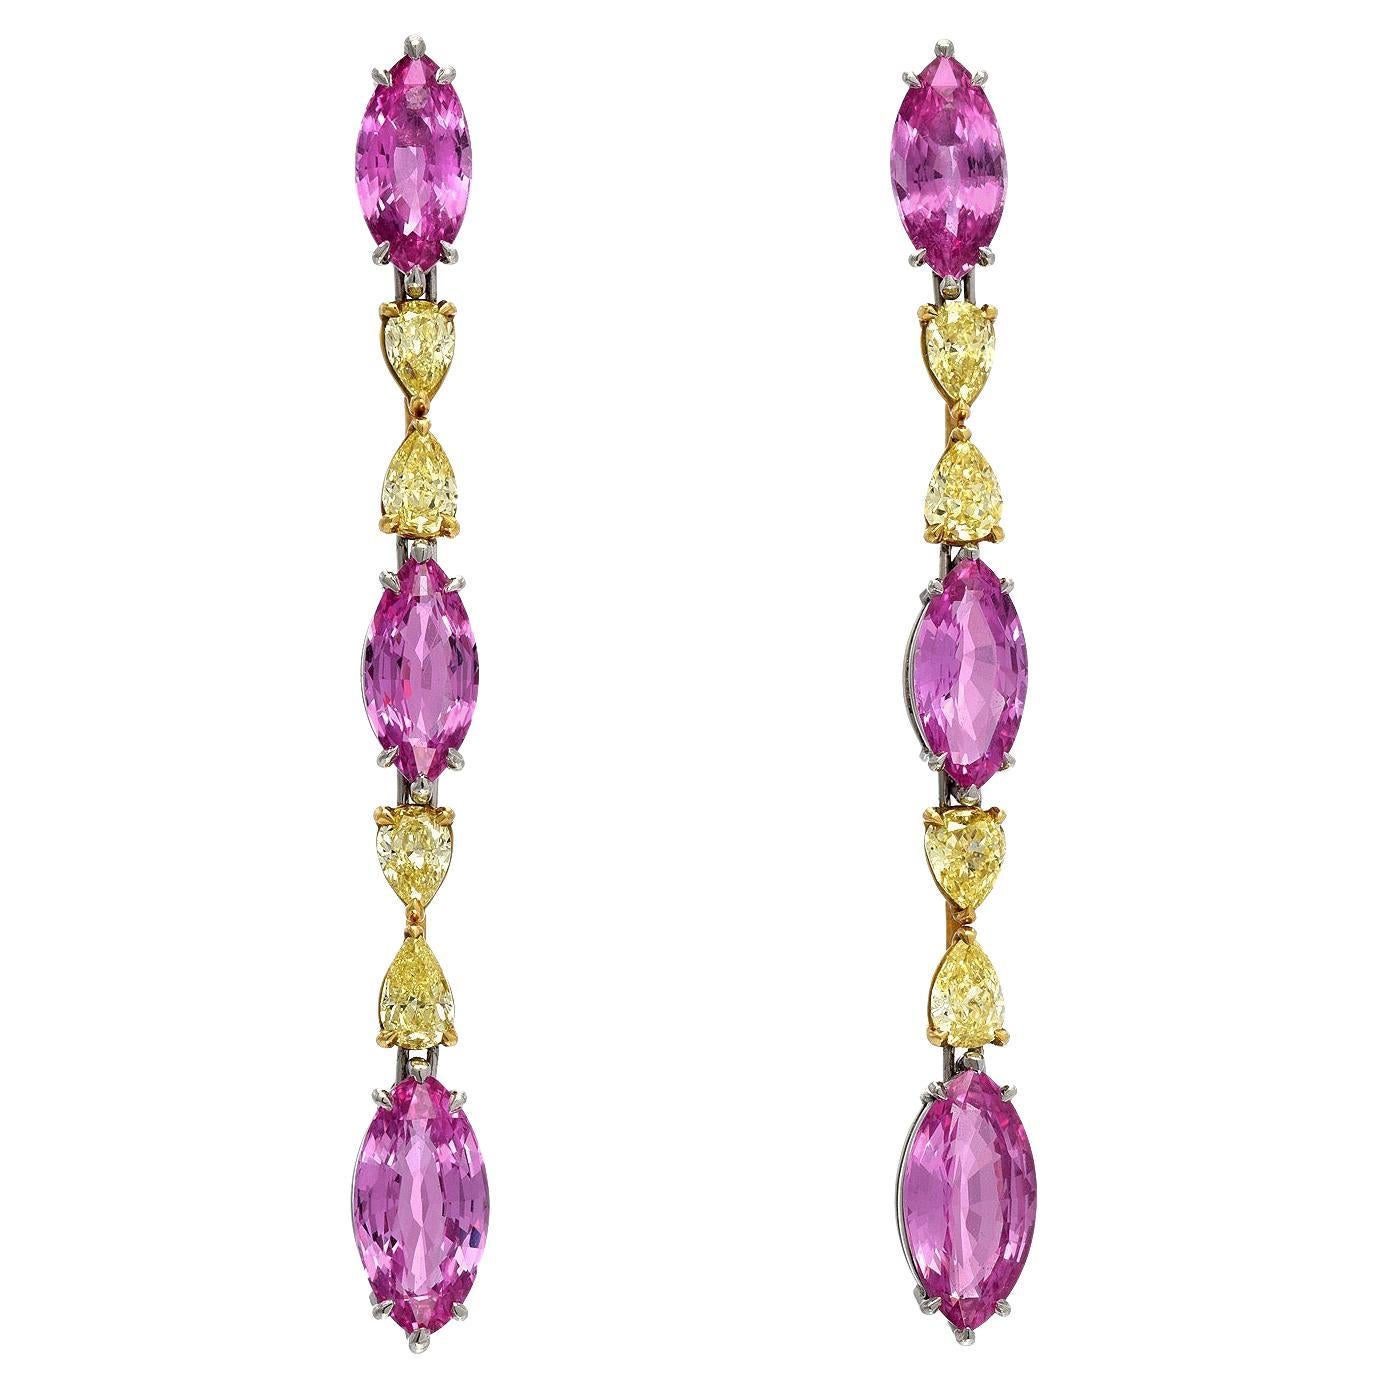 A brilliant pair of platinum and 18K yellow gold Pink Sapphire and Diamond earrings, remarkably set with a total of 10.10ct Pink Sapphire marquise, and a total of 2.00ct pear shaped fancy intense yellow diamonds.
Total length is 2.25 inches.